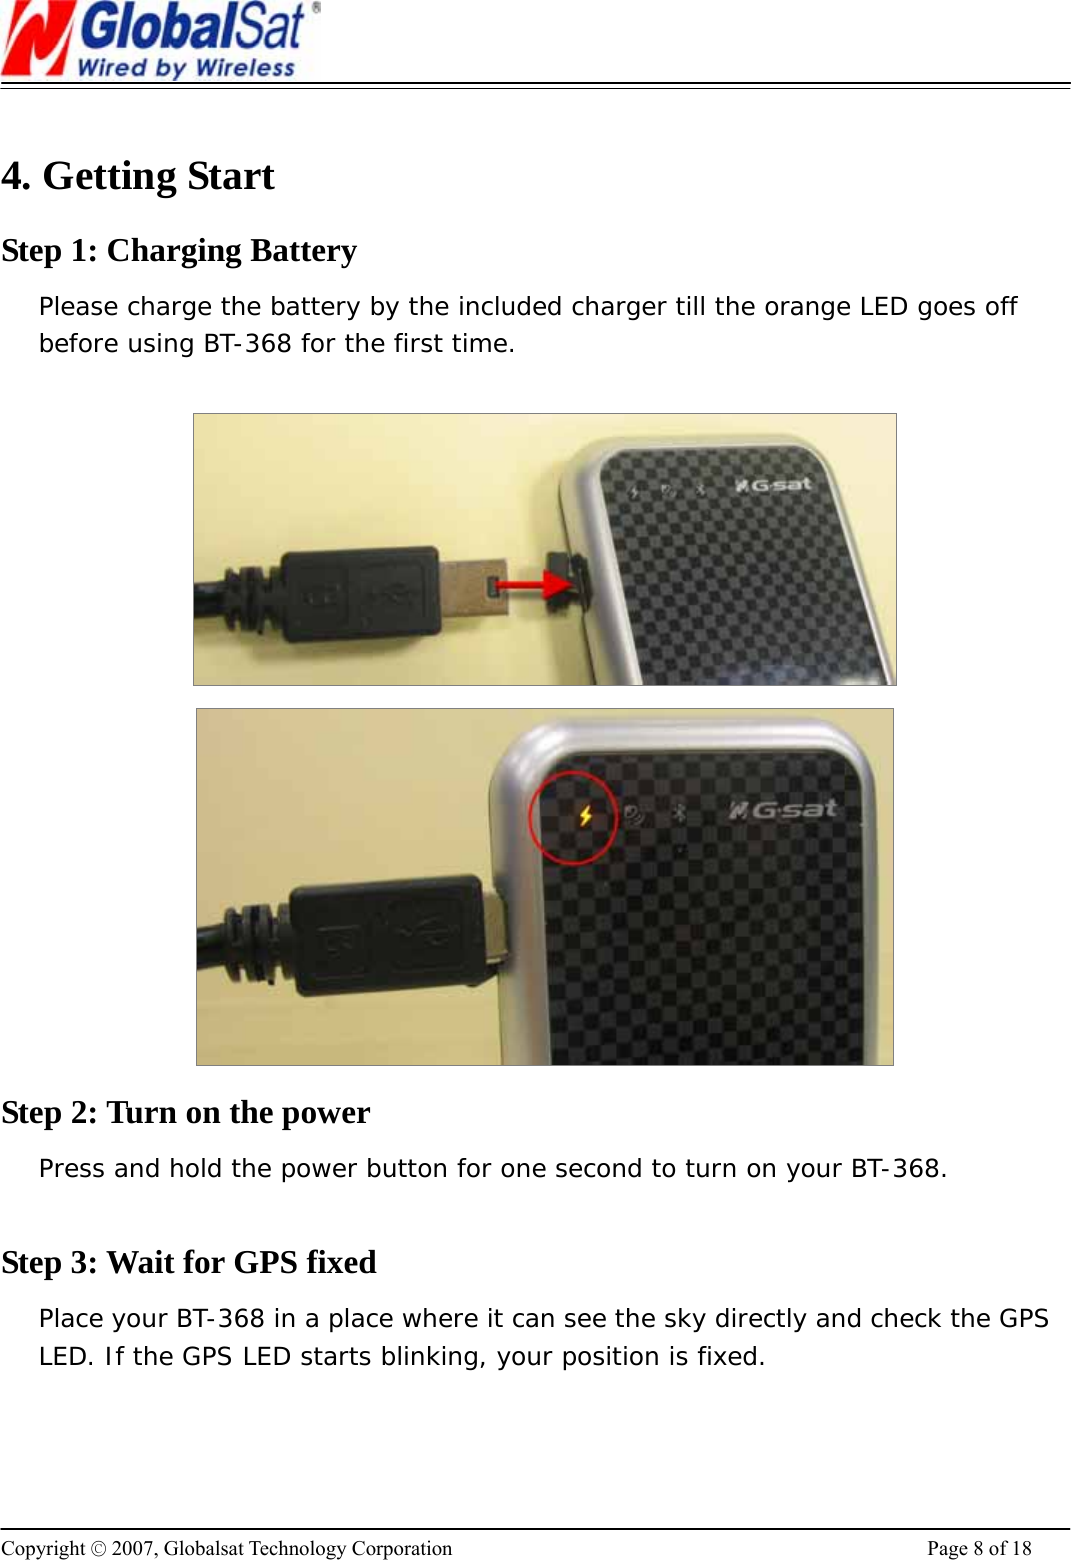                                                                      Copyright © 2007, Globalsat Technology Corporation  Page 8 of 18  4. Getting Start   Step 1: Charging Battery Please charge the battery by the included charger till the orange LED goes off before using BT-368 for the first time.     Step 2: Turn on the power Press and hold the power button for one second to turn on your BT-368.  Step 3: Wait for GPS fixed Place your BT-368 in a place where it can see the sky directly and check the GPS LED. If the GPS LED starts blinking, your position is fixed.  